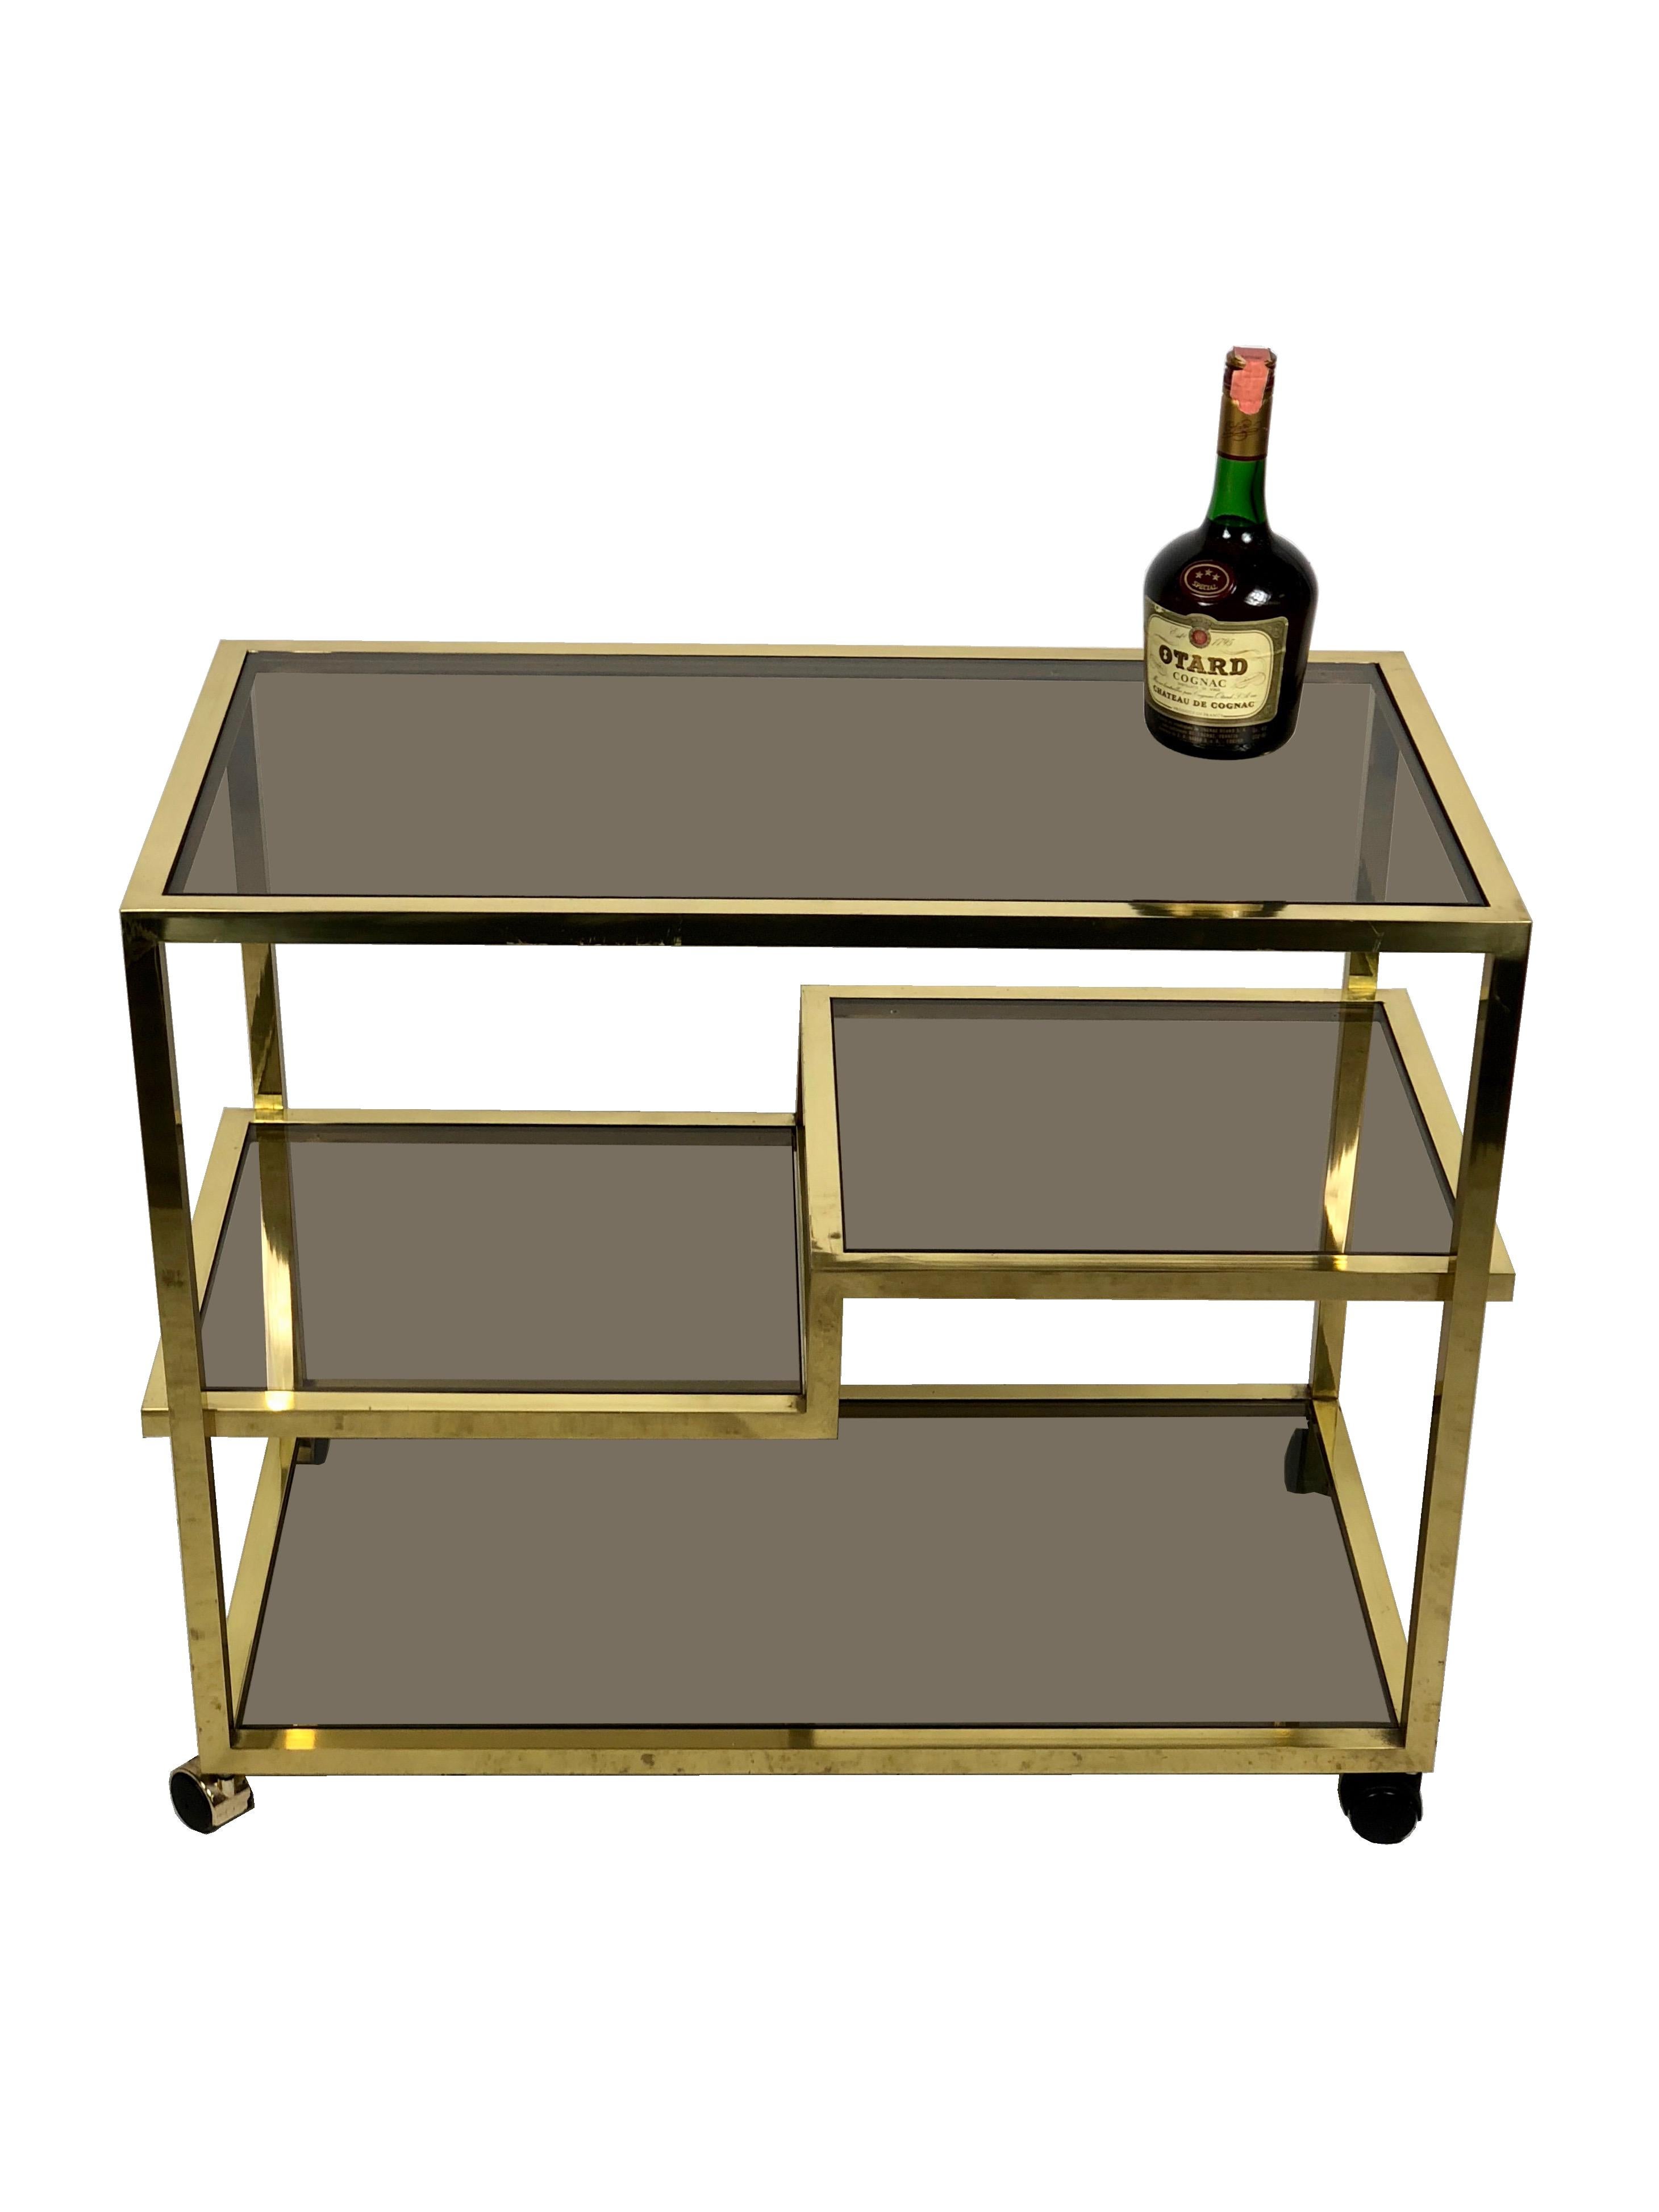 This vintage brass serving cart features unique midcentury design, combining simple lines and plenty of room for storage or service. Attributed to the Italian designer Romeo Rega.